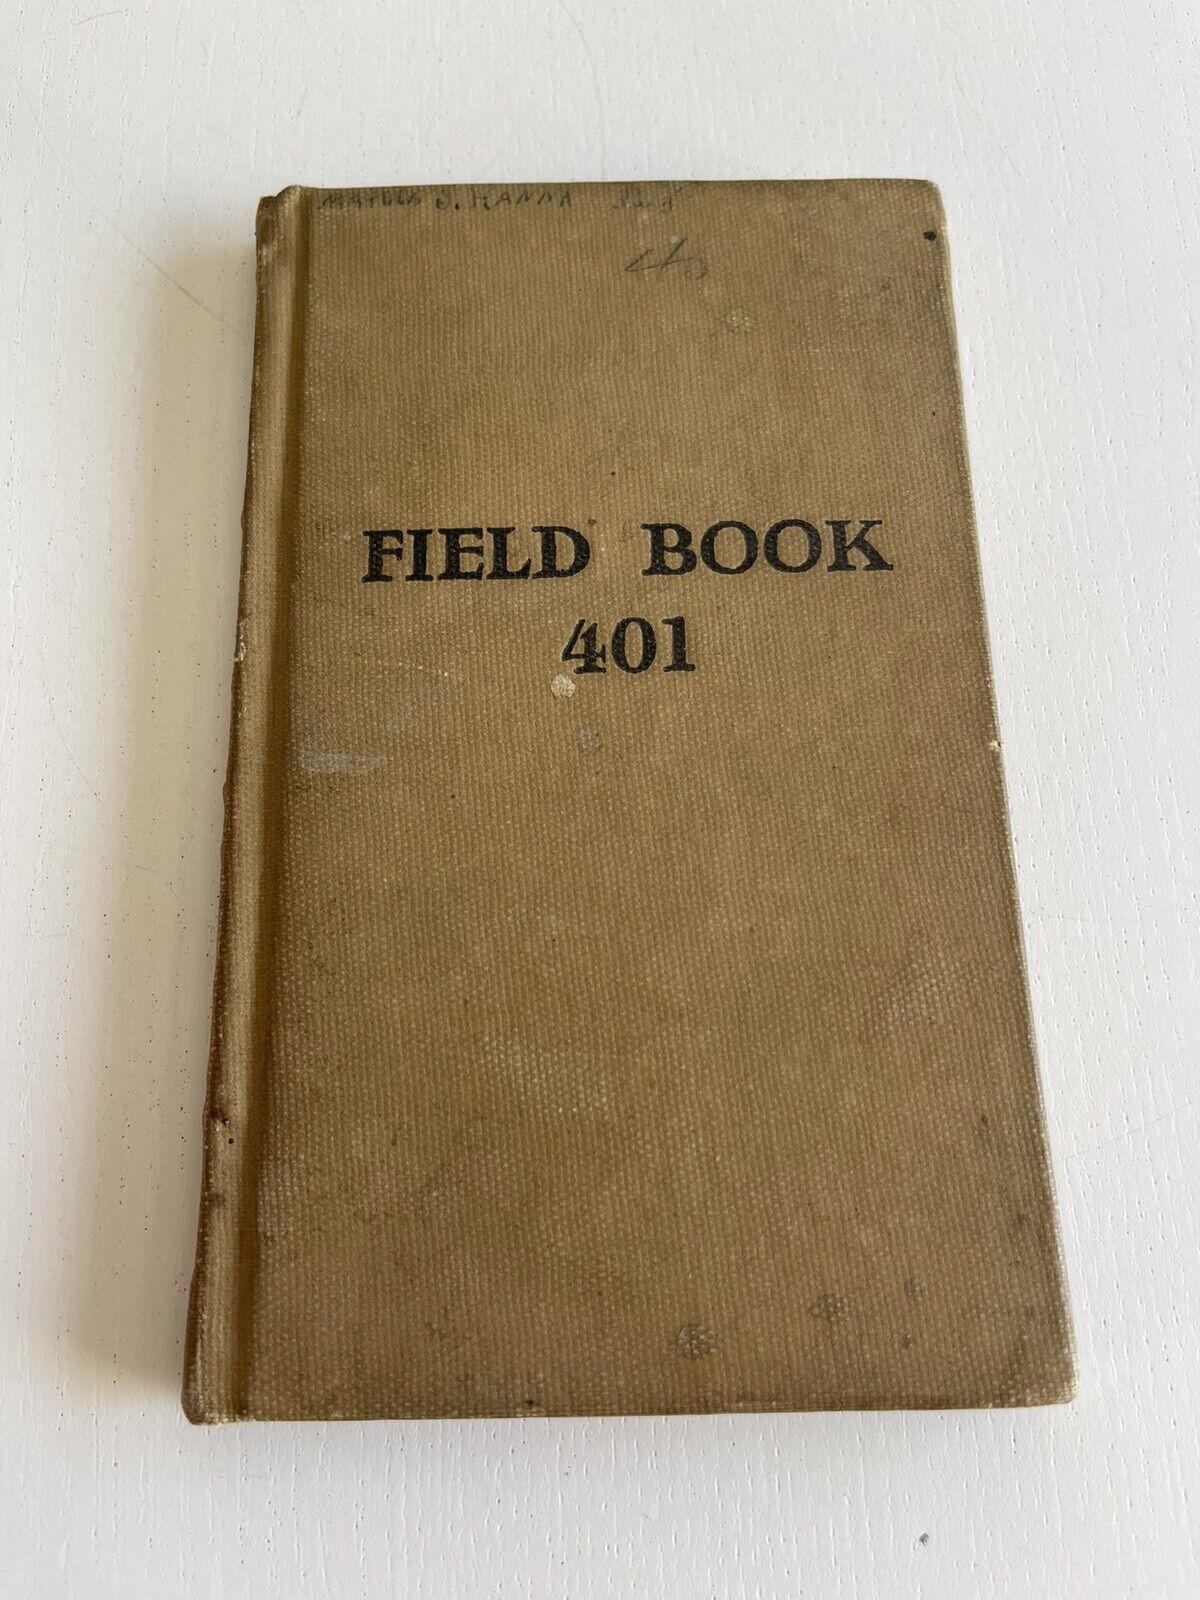 1925 Field Book 401 With Some Notes And Sketches - Survey 